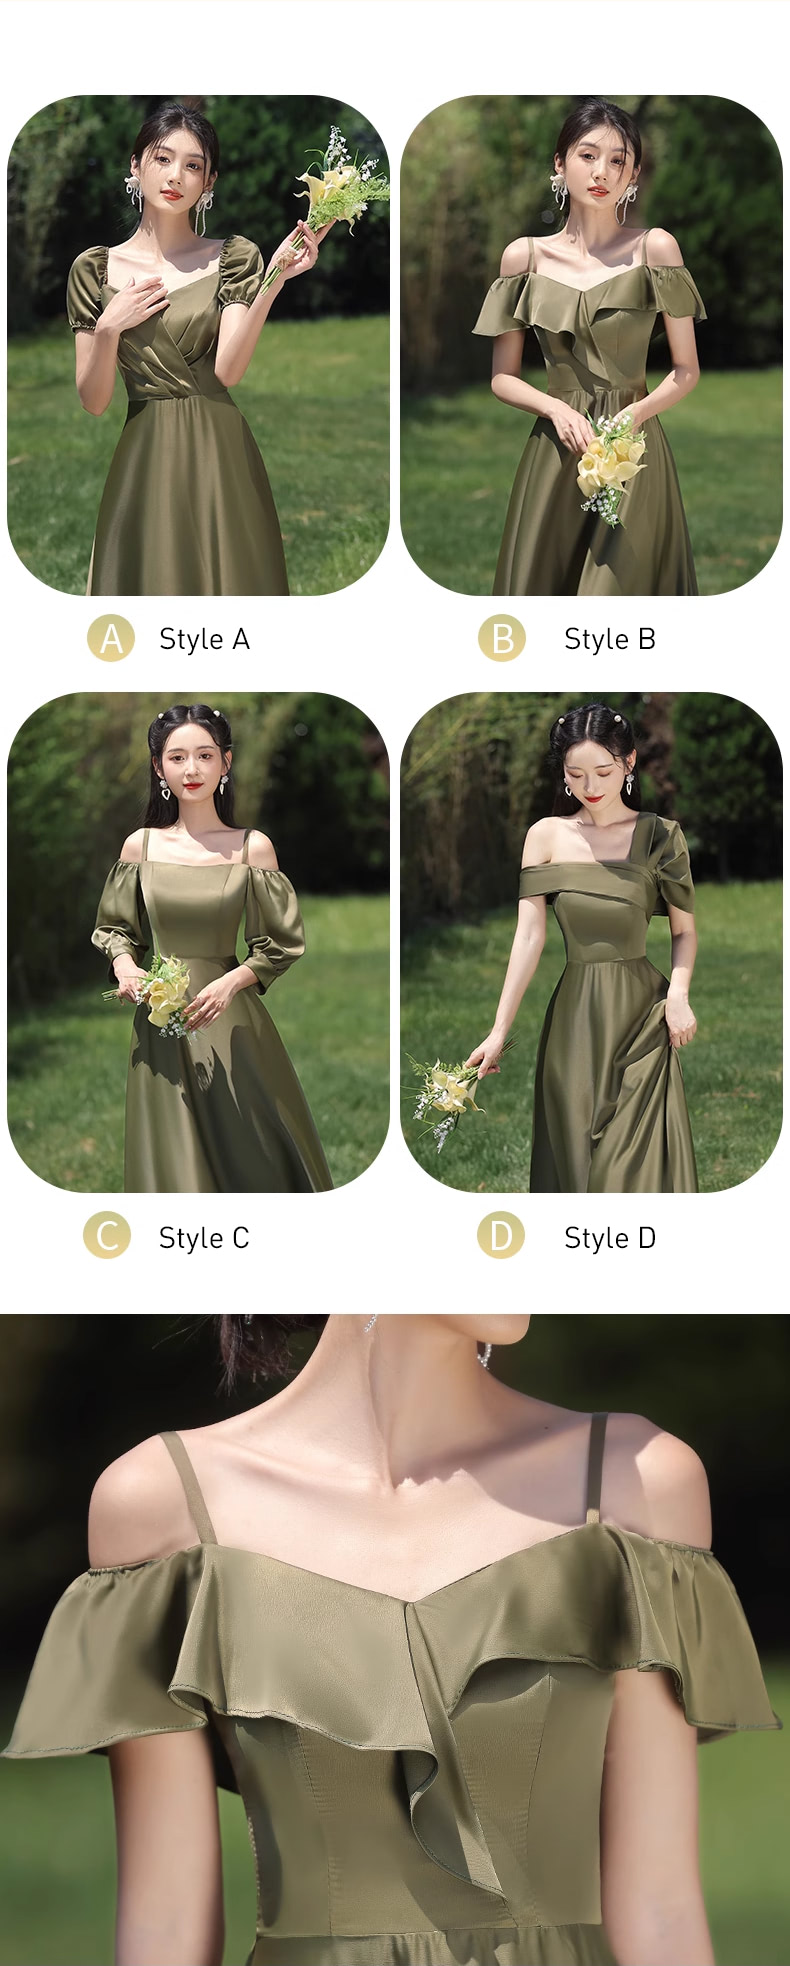 Simple-Green-Satin-Bridesmaid-Dress-Cocktail-Prom-Evening-Gowns12